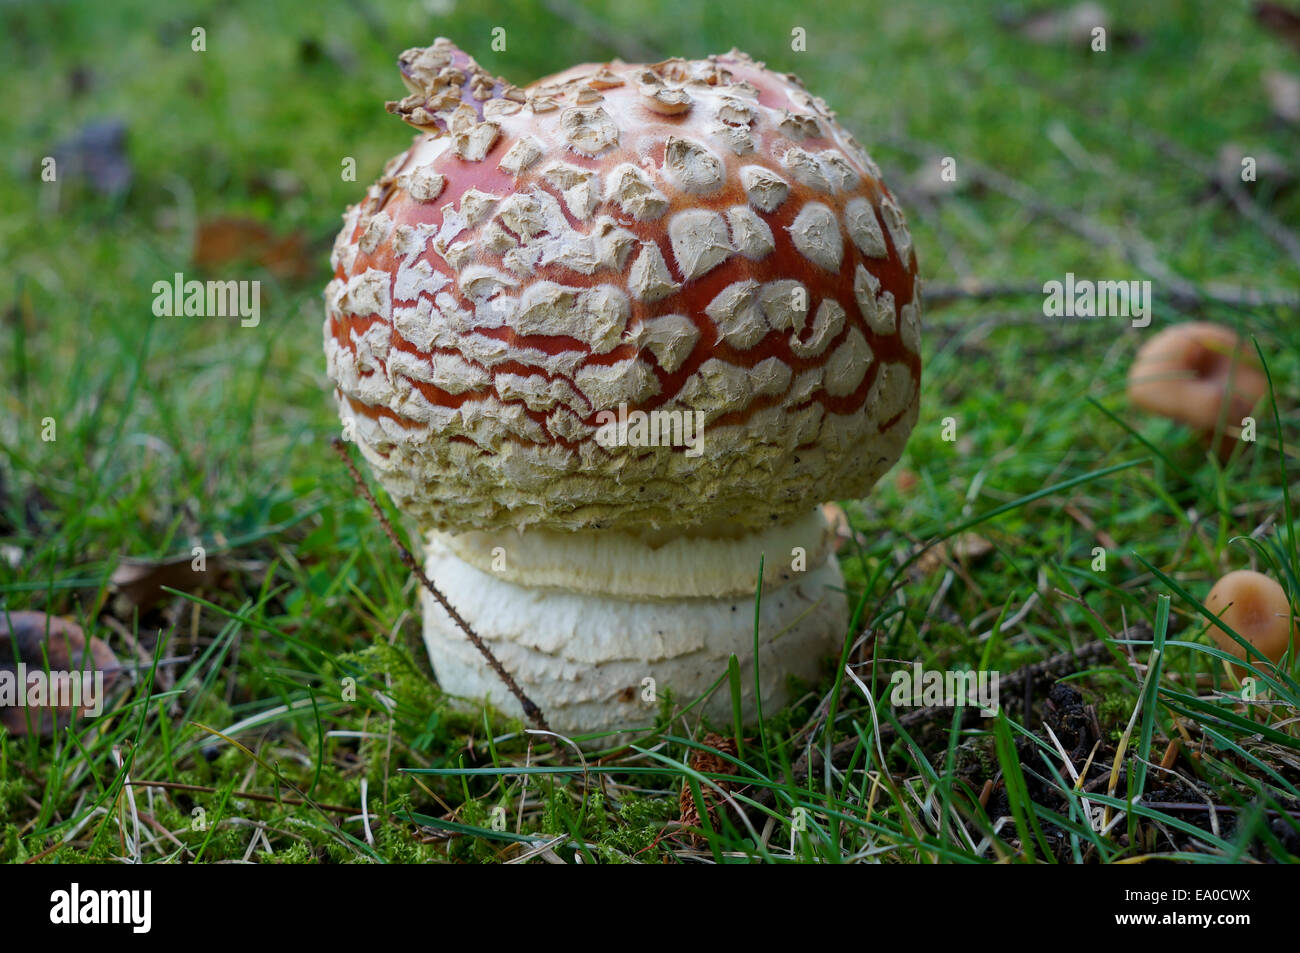 Amanita Muscaria (bulb stage) or fly agaric mushroom growing in green grass Stock Photo